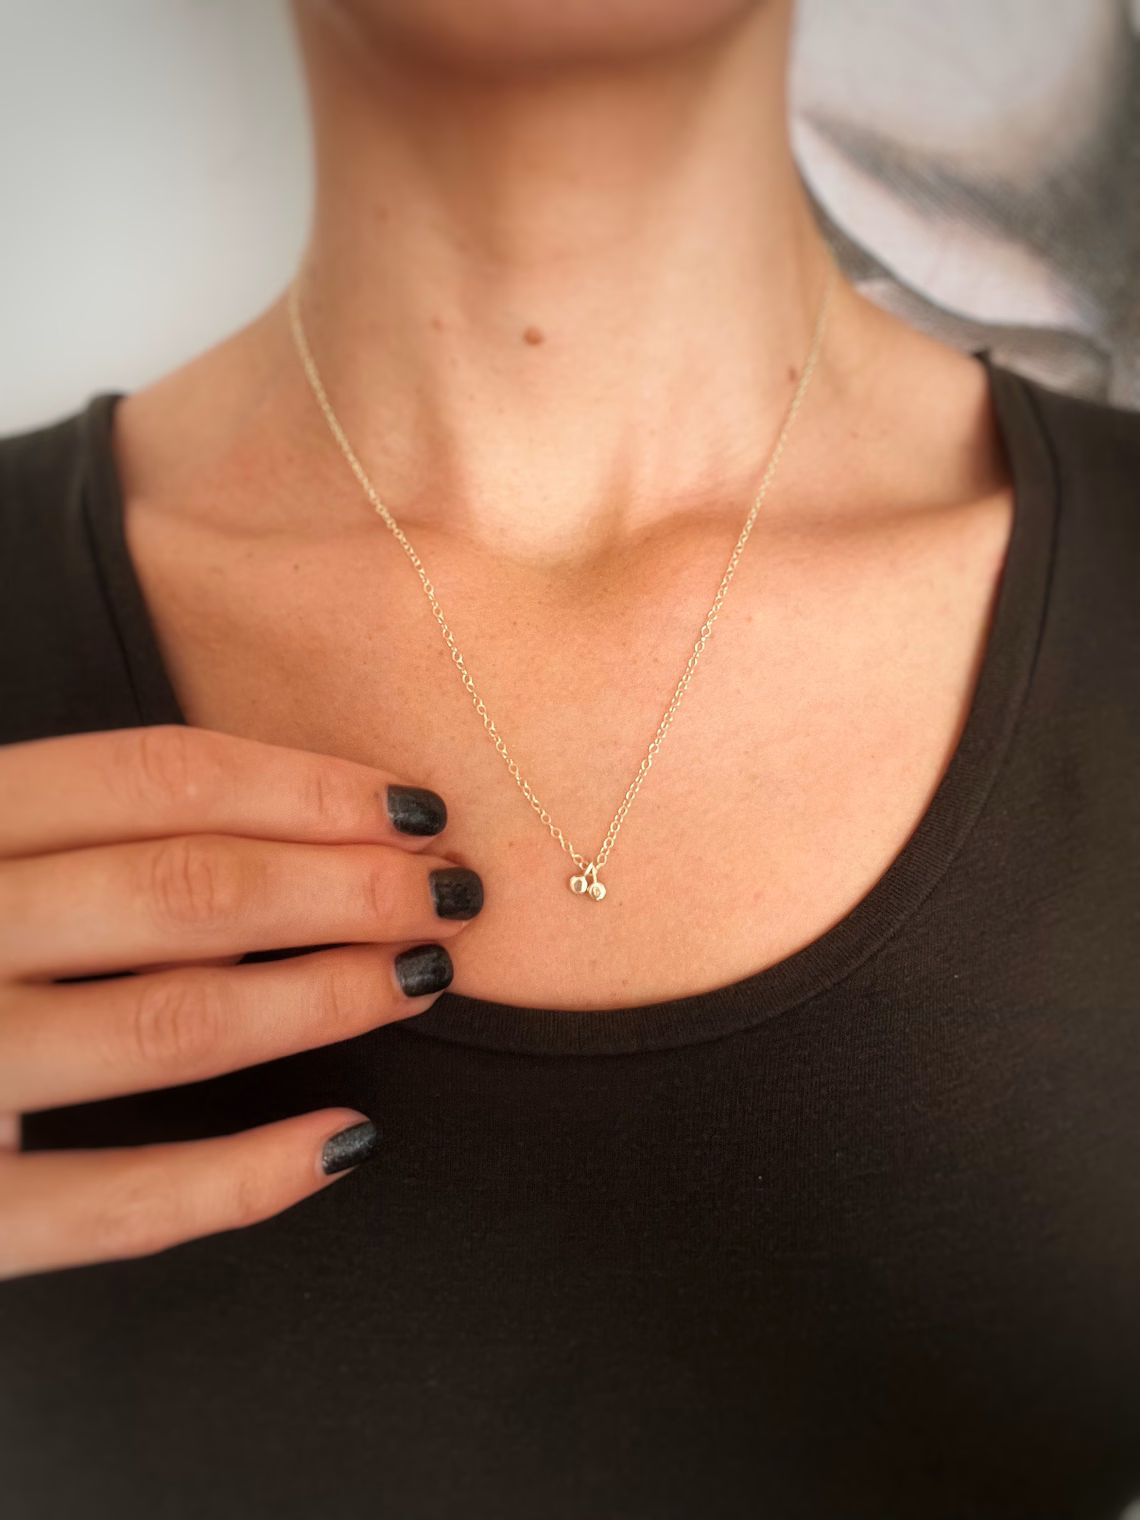 Solid 9ct gold 2 tiny letter pebble pendant,recycled personalised initial stacking necklace